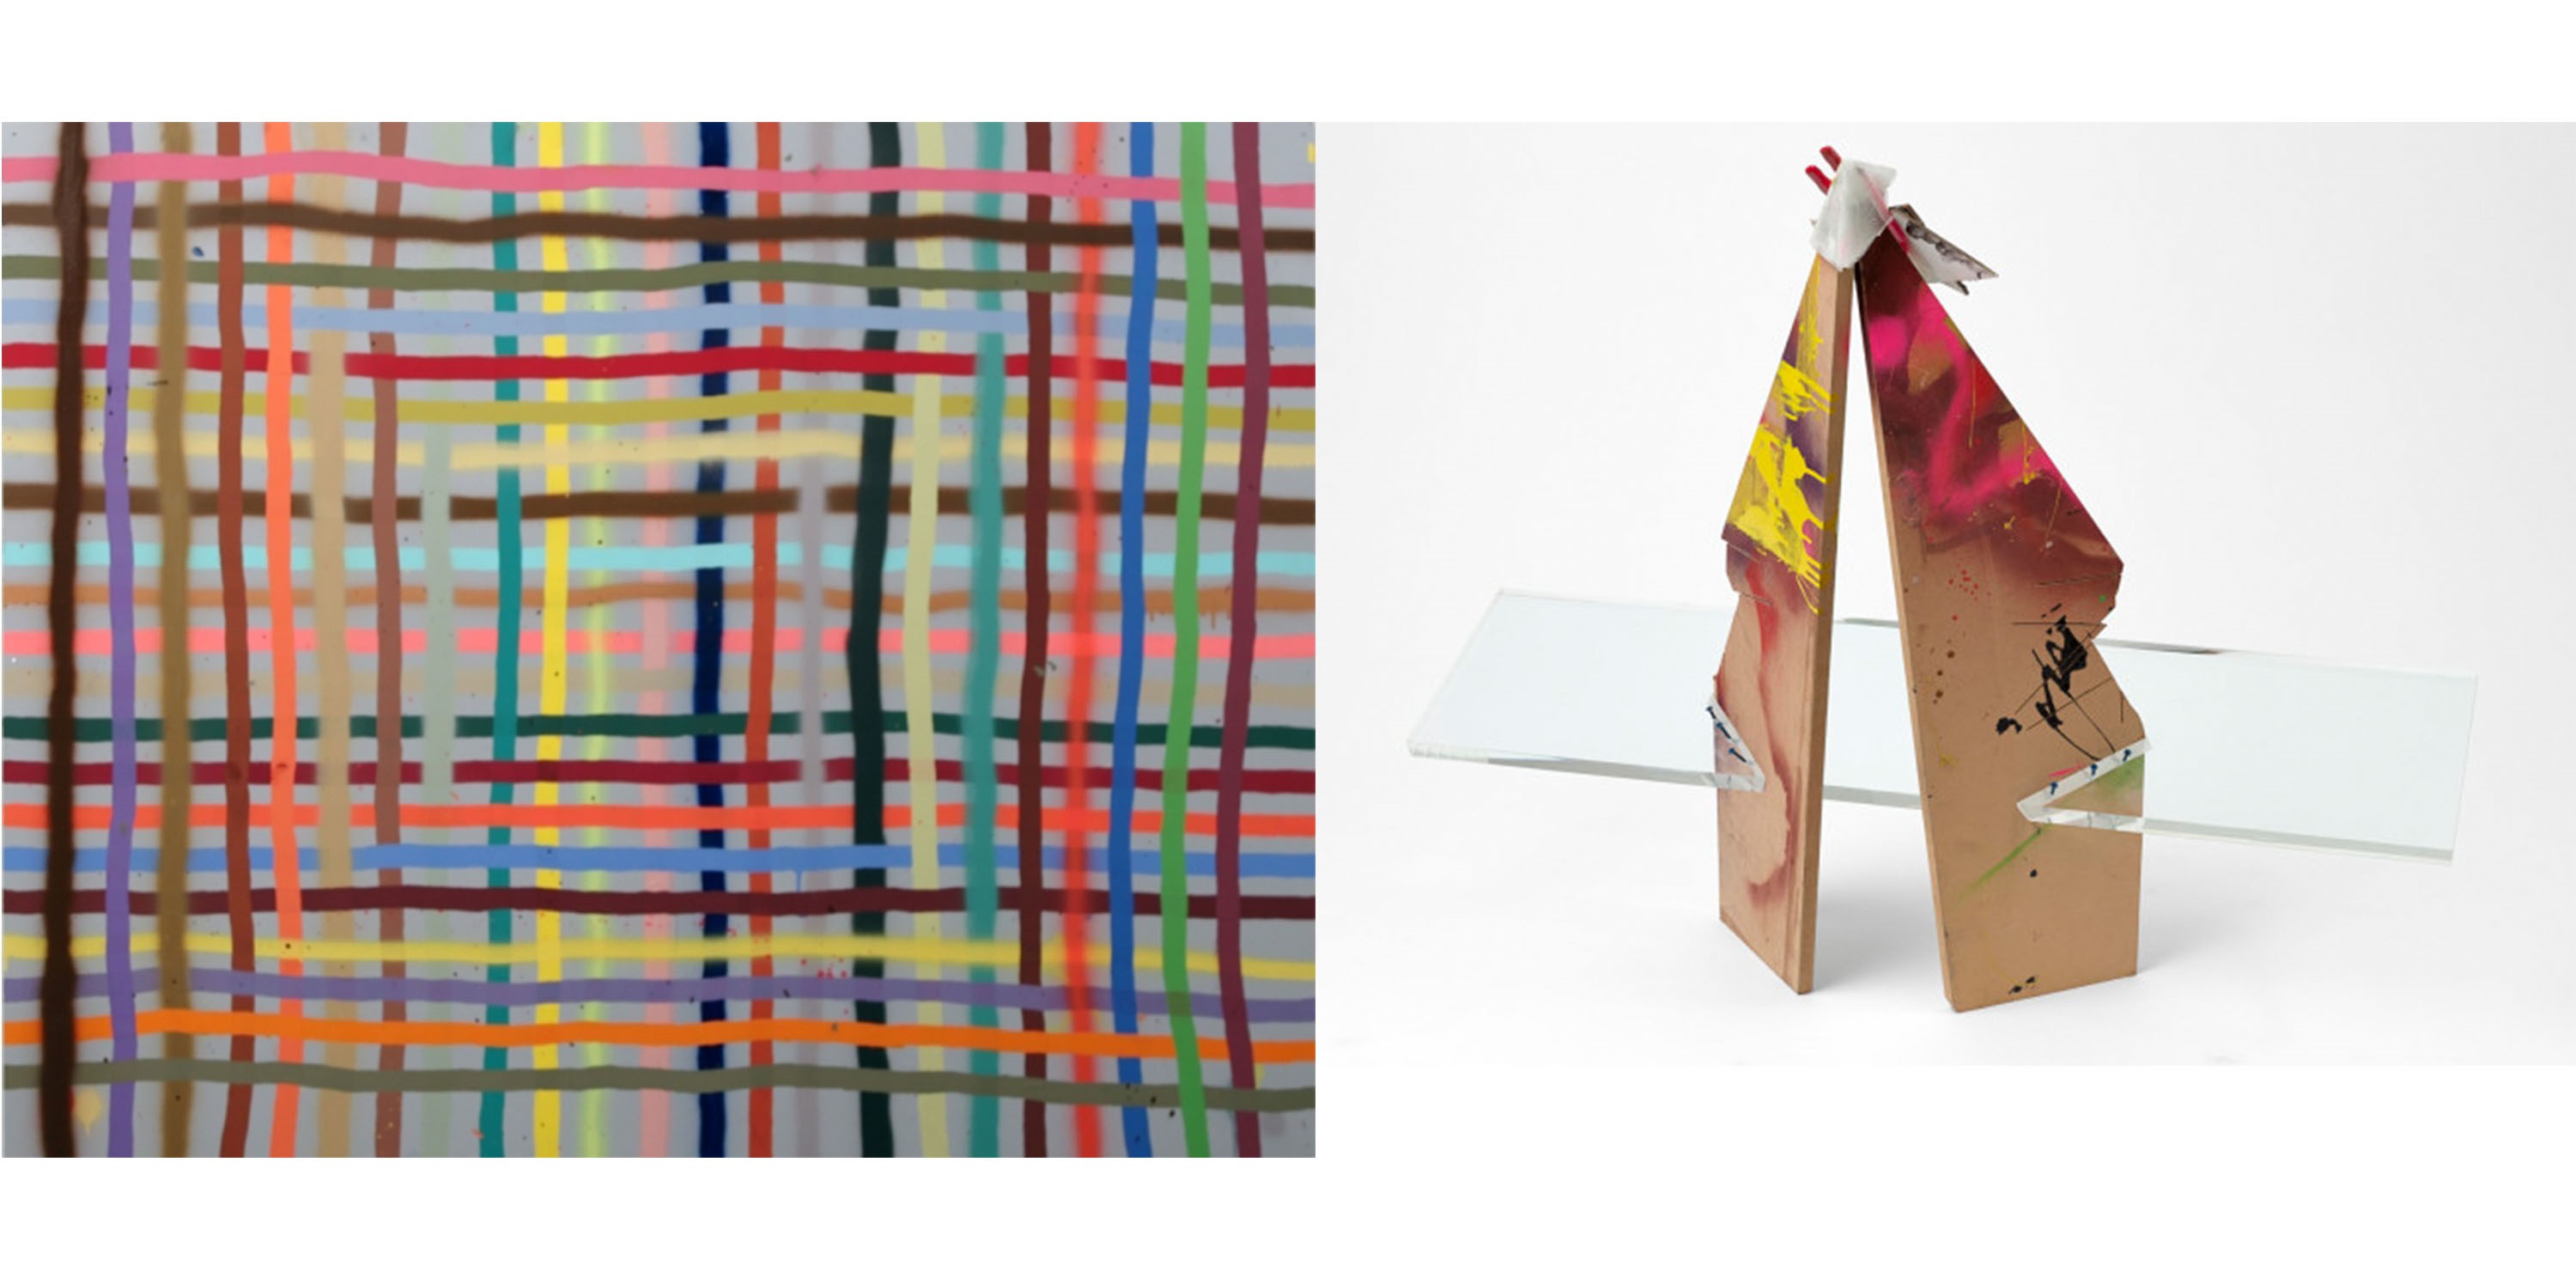 Image: Left: Untitled (2015), Painting by Alicia McCarthy / Right: dissolve me + the love between (2015), Sculpture by Harry Dodge, Courtesy of the Artists 